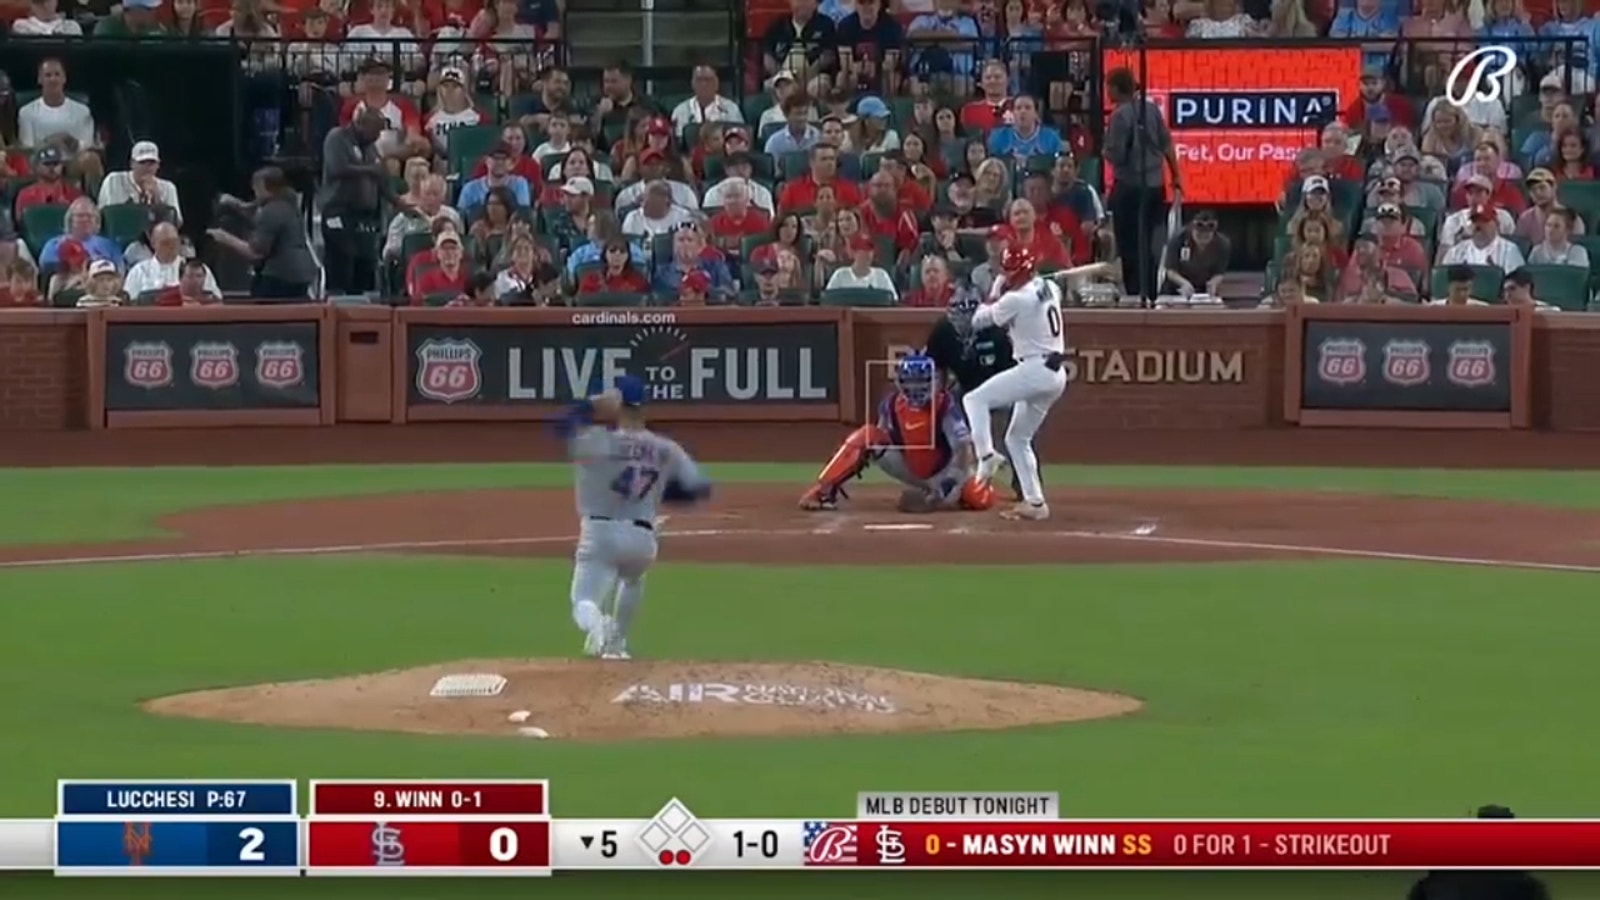 Highlights from Mets' victory over Cardinals